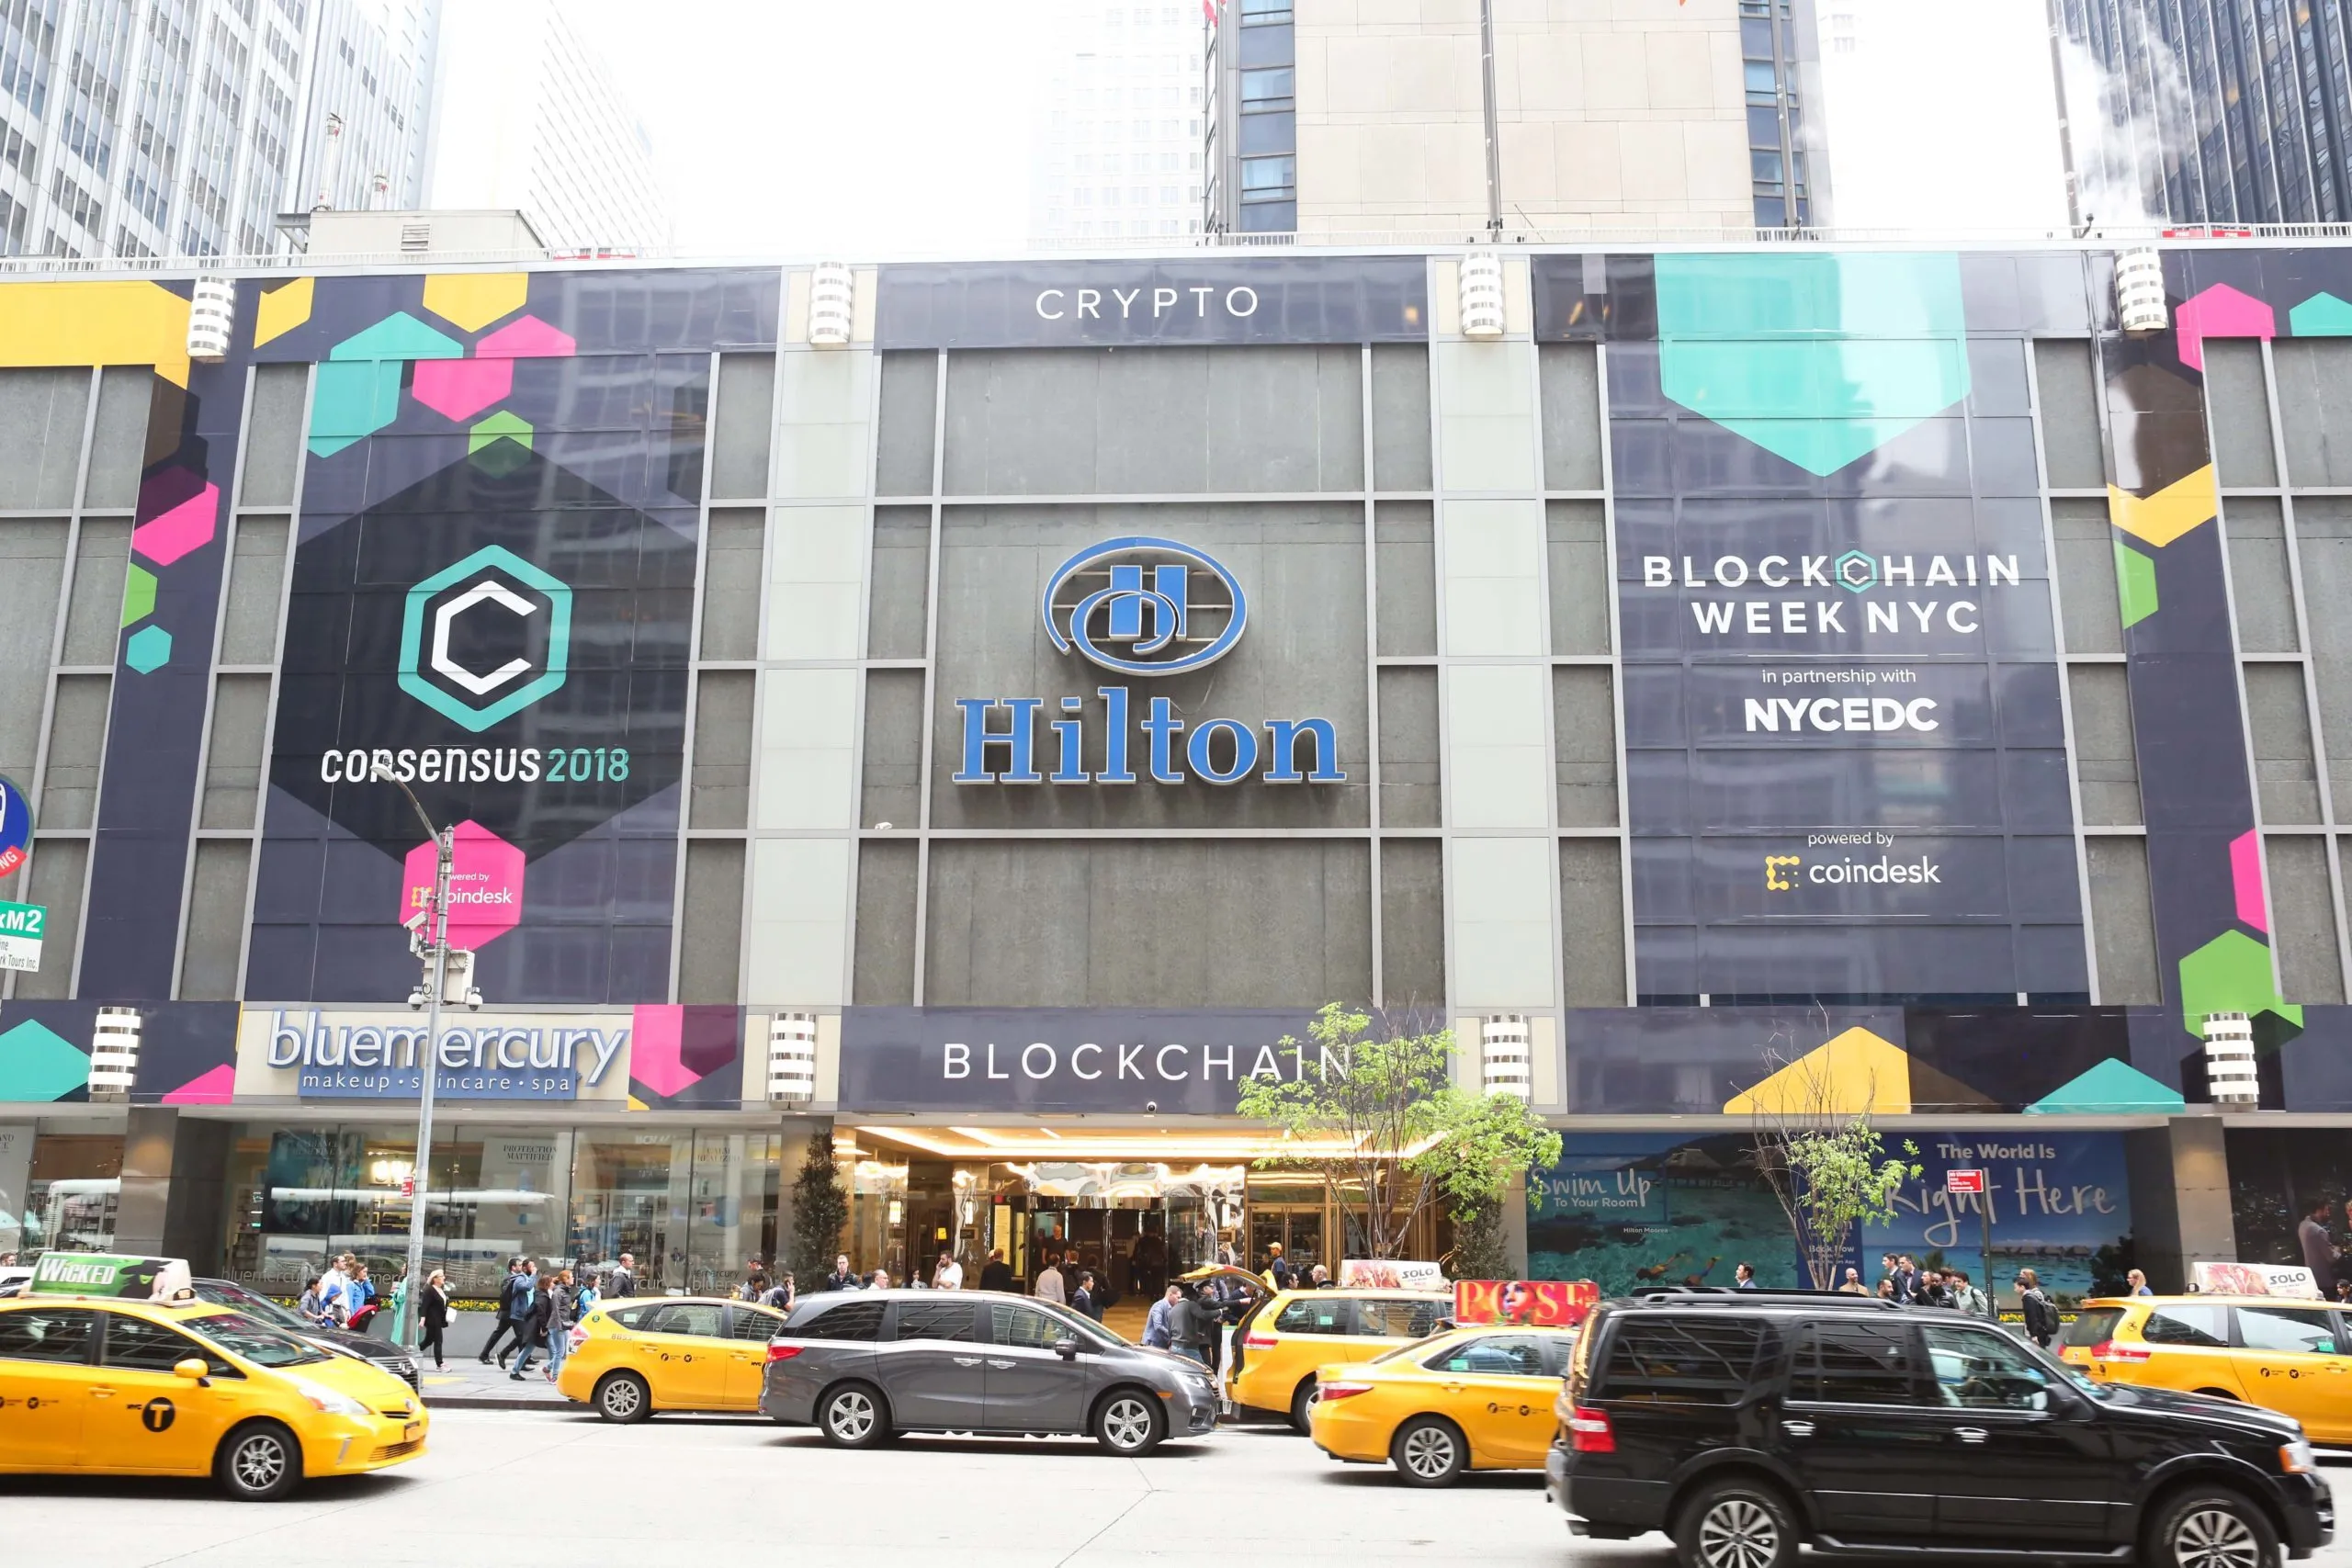 Consensus, at the New York Hilton Midtown, is the pinnacle of New York Blockchain Week. IMAGE SOURCE: Coindesk.